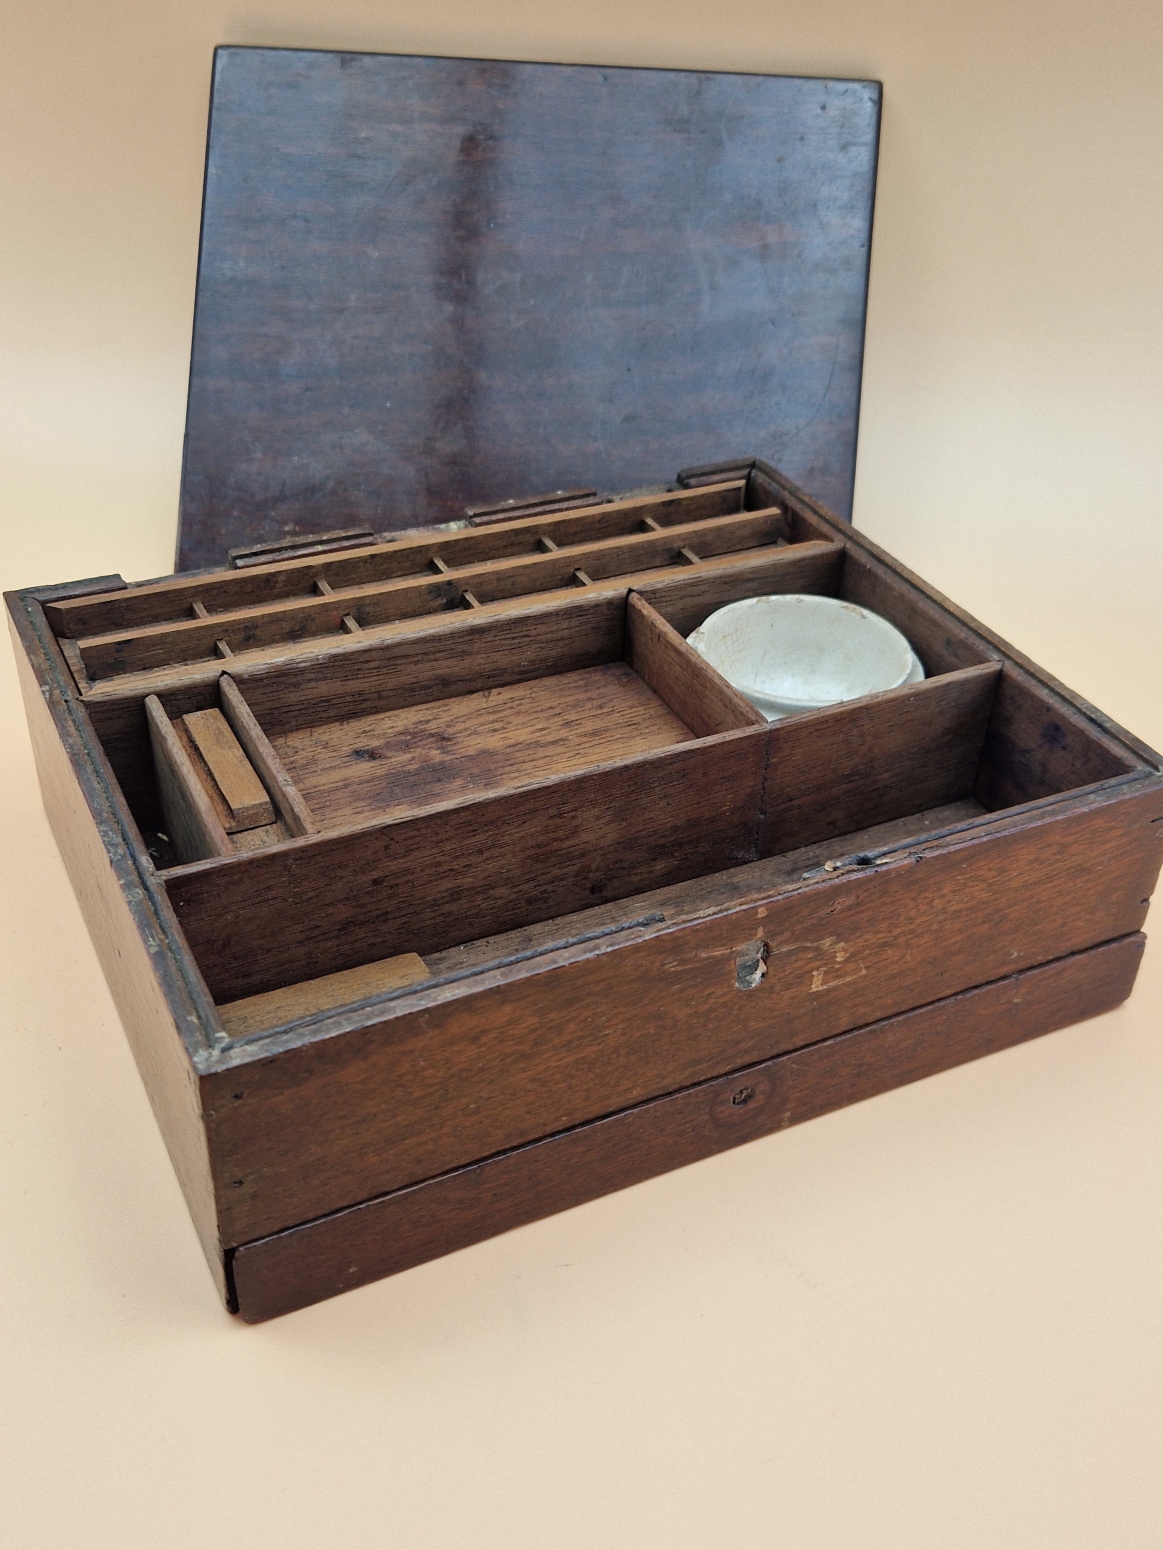 A LATE 19th C. REEVES MAHOGANY PAINT BOX CONTAINING SOME BLOCKS OF UNUSED PAINT AND CERAMIC PALETTES - Image 9 of 9